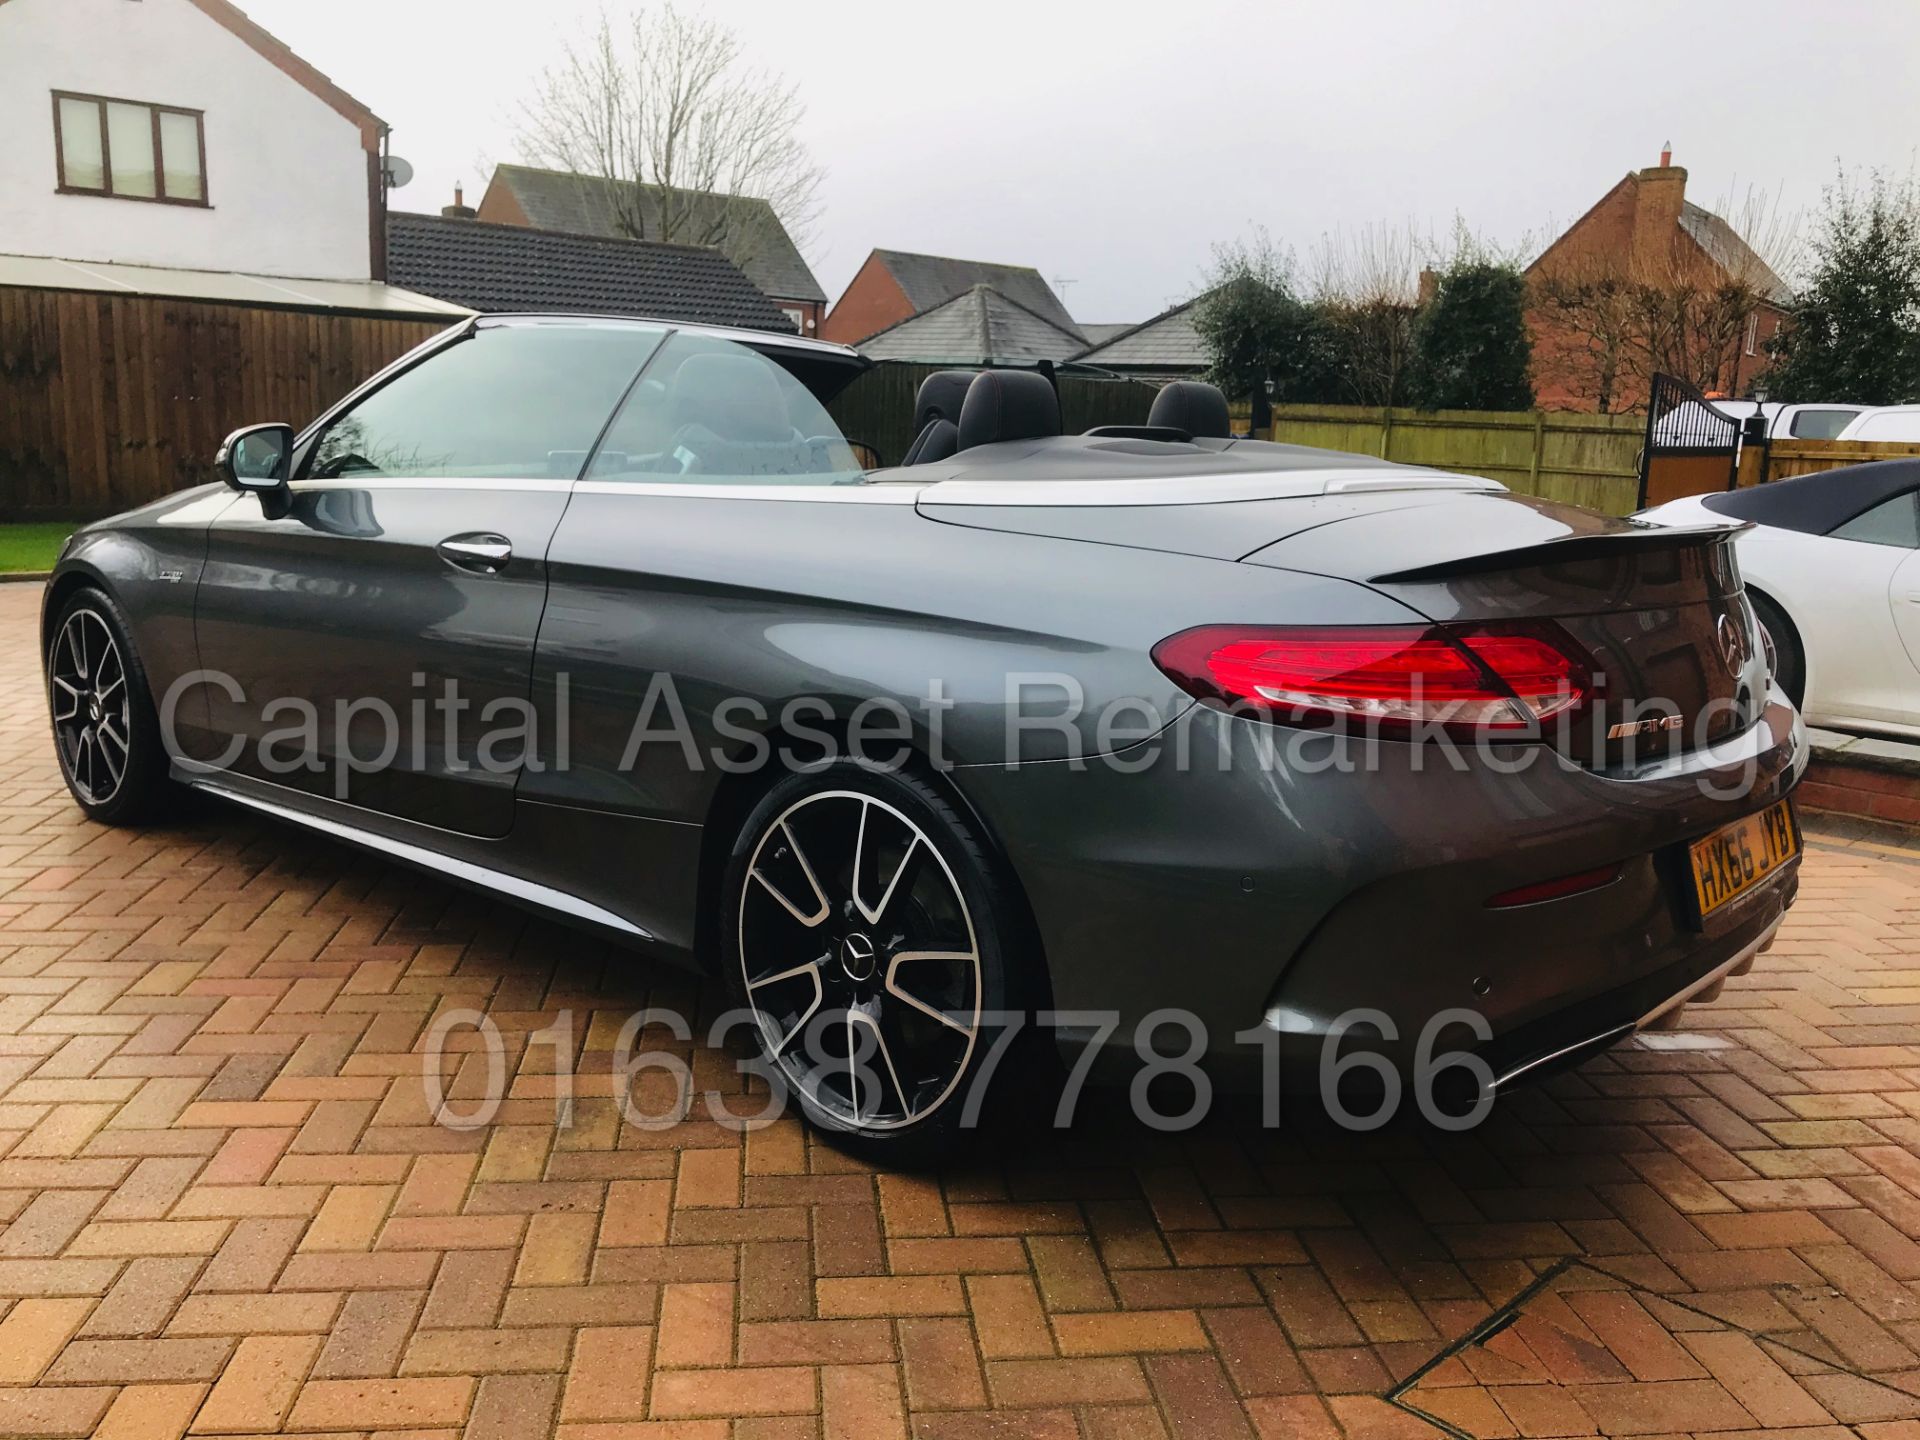 ON SALE MERCEDES-BENZ C43 *AMG BI-TURBO* CABRIOLET (2017) '3.0 V6 - 367 BHP - 4 MATIC - 9 SPEED AUTO - Image 20 of 59